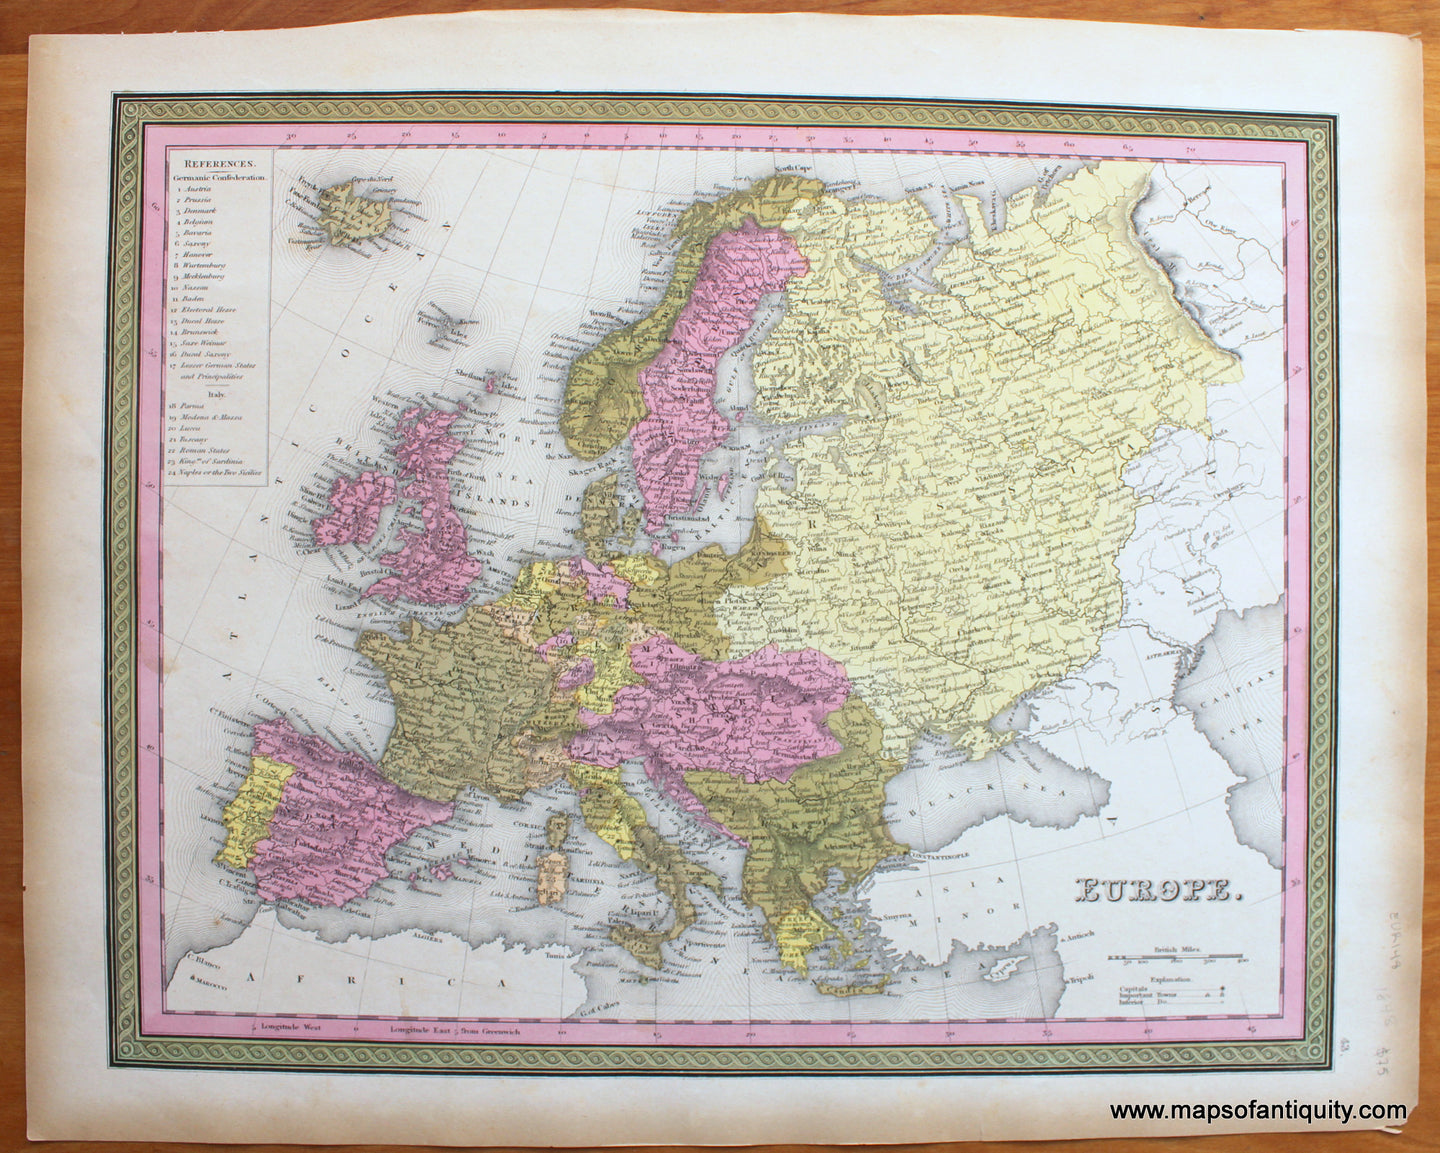 Antique-Hand-Colored-Map-Lithograph.-Europe.-Europe-Europe-General-1848-Mitchell-Maps-Of-Antiquity